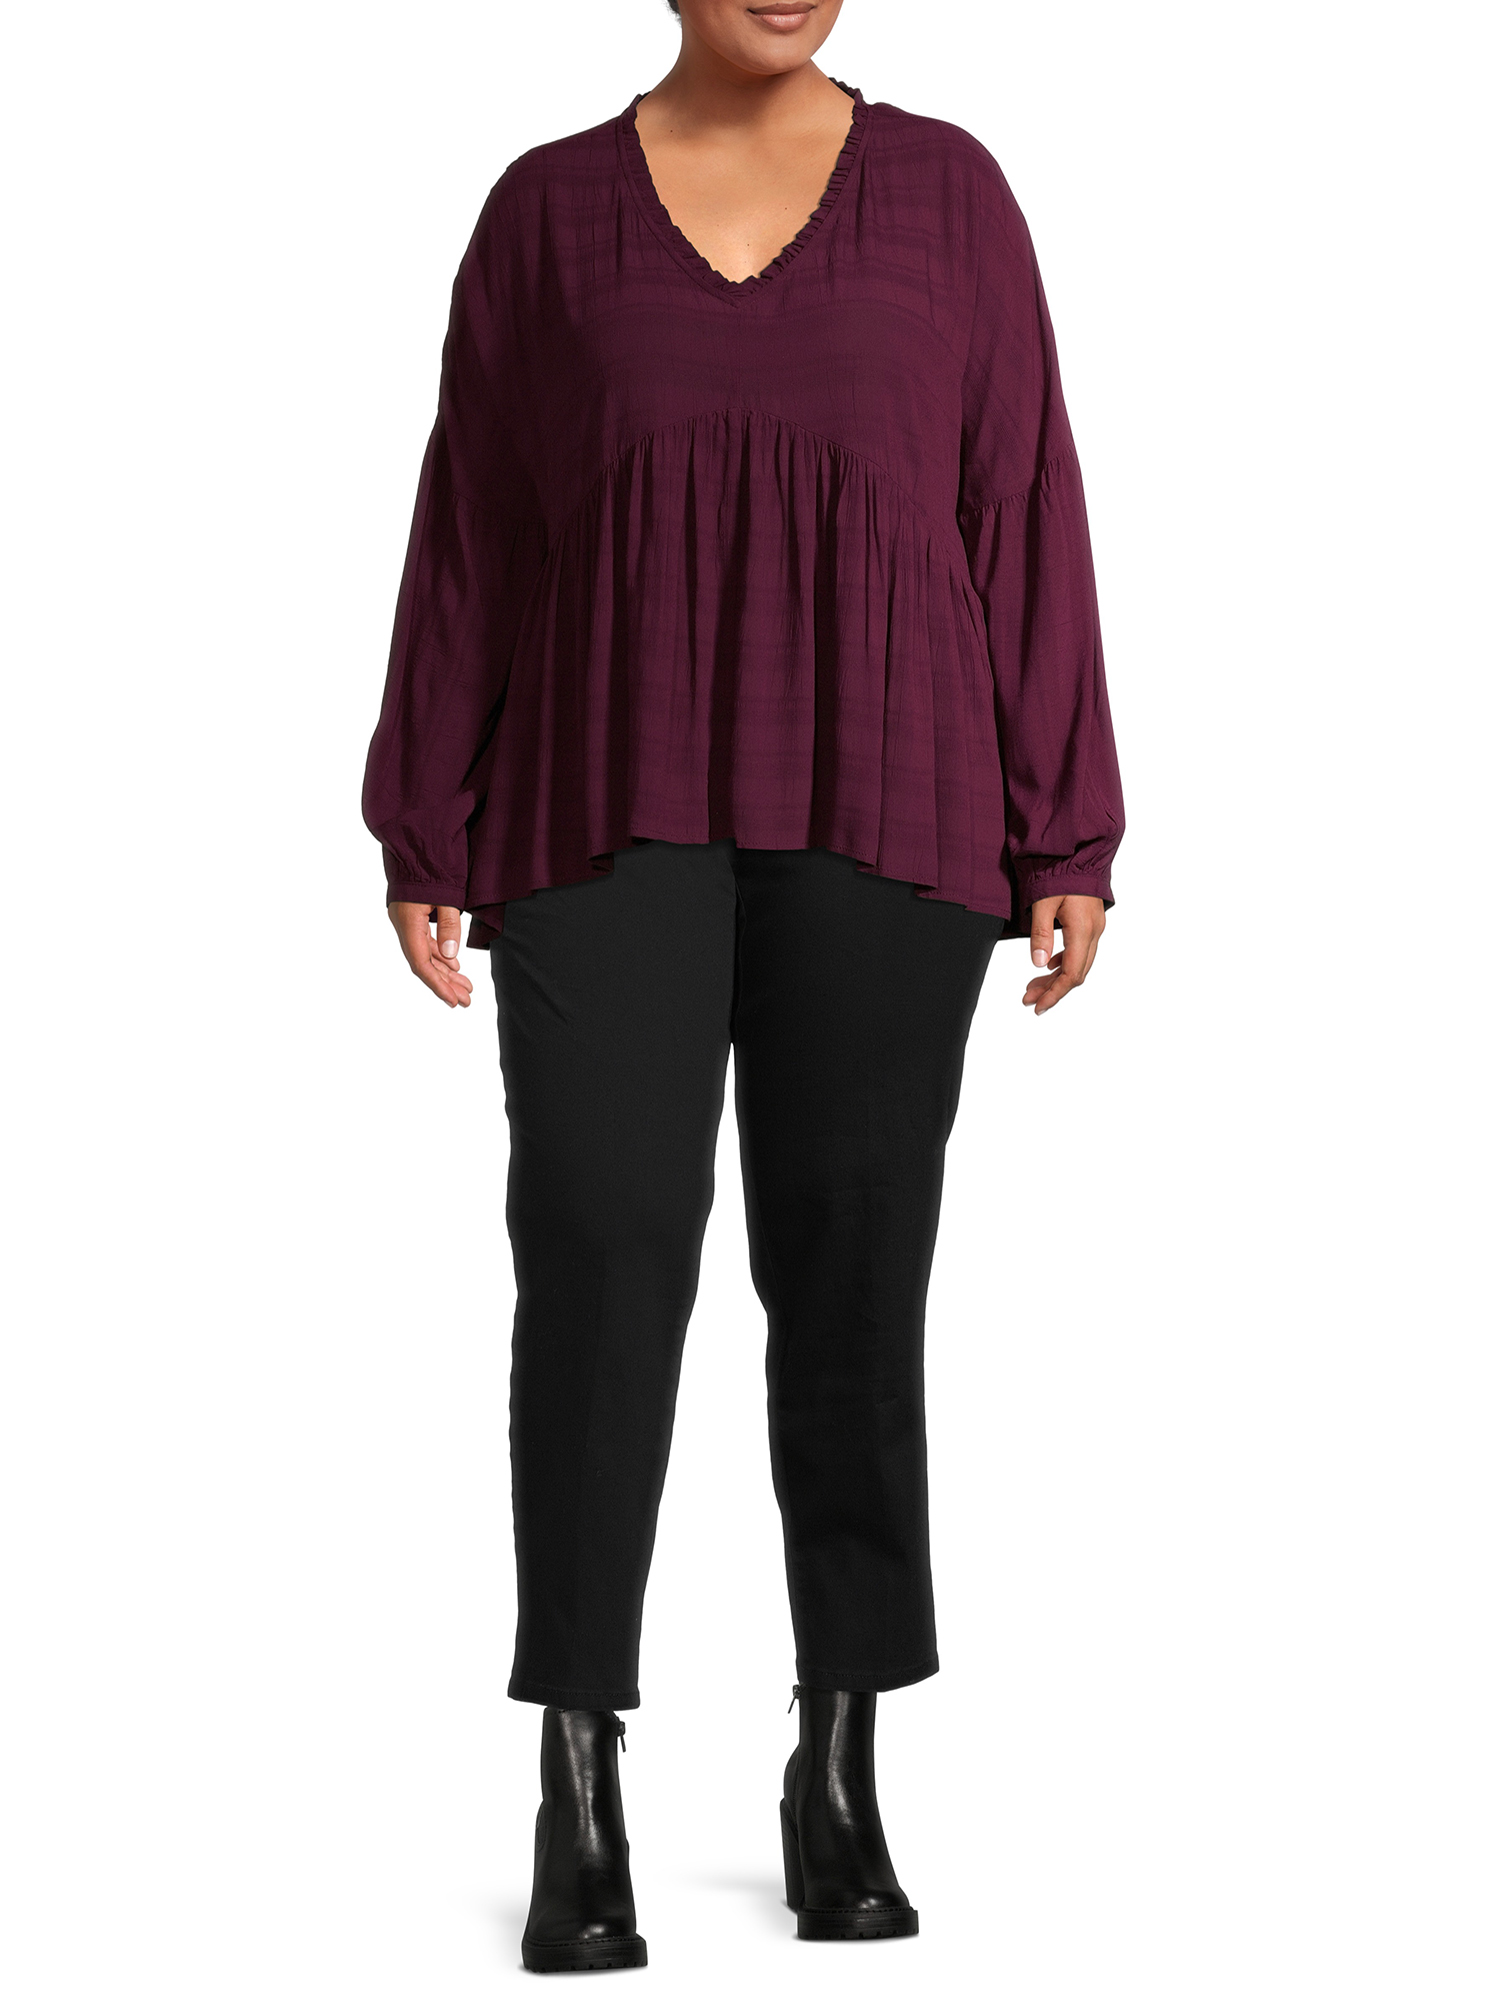 Just My Size Women's Plus 2 Pocket Pull-On Pant - image 2 of 8